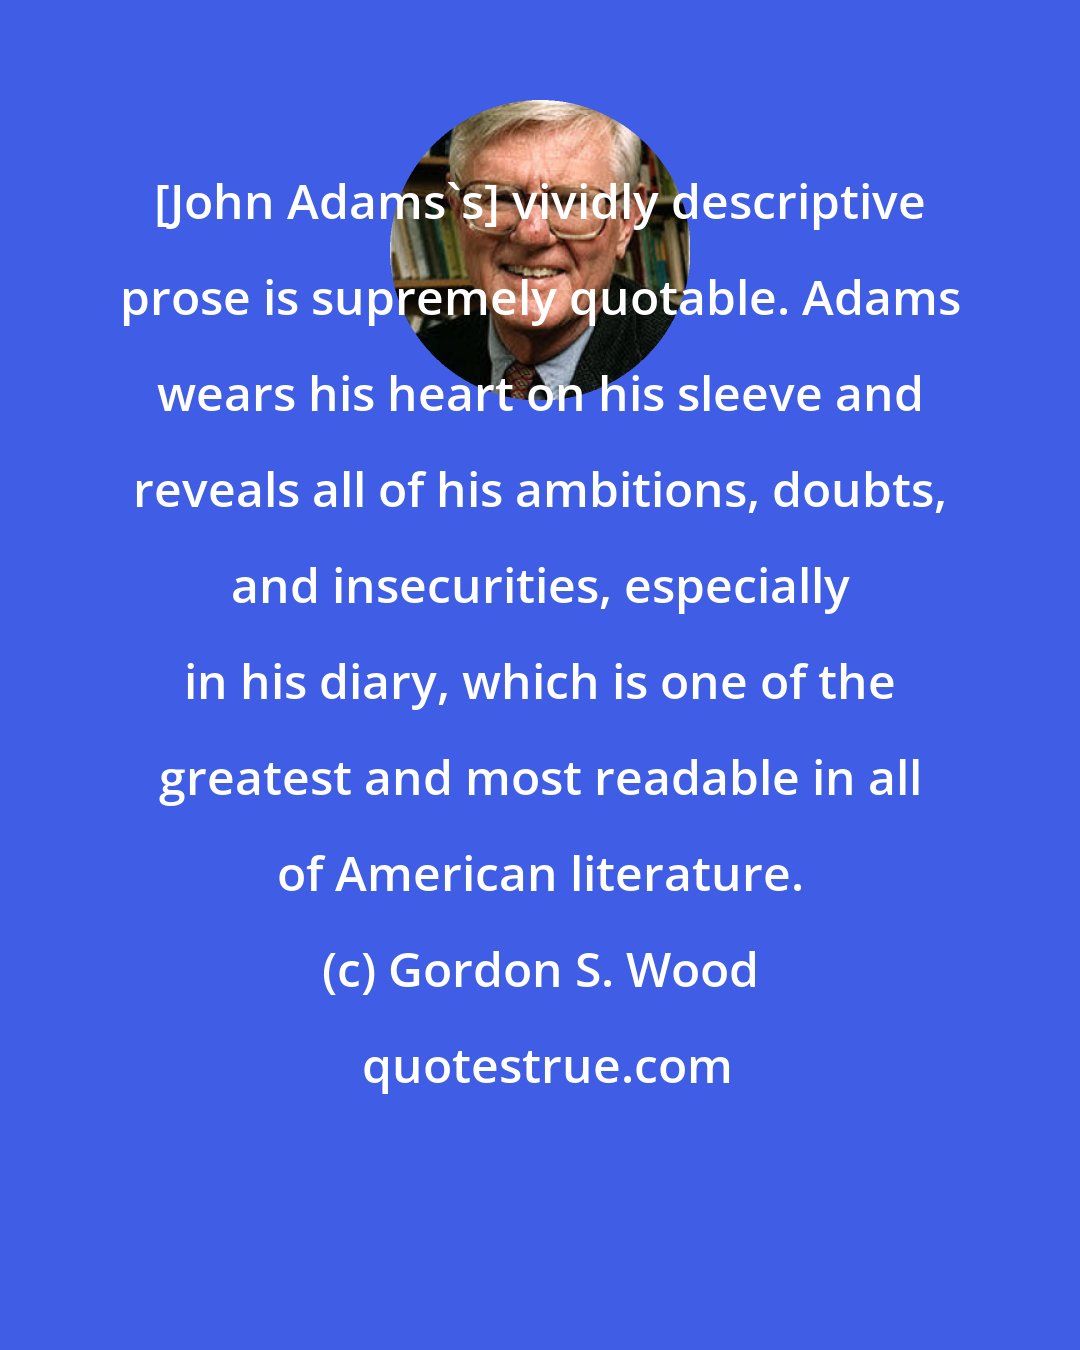 Gordon S. Wood: [John Adams's] vividly descriptive prose is supremely quotable. Adams wears his heart on his sleeve and reveals all of his ambitions, doubts, and insecurities, especially in his diary, which is one of the greatest and most readable in all of American literature.